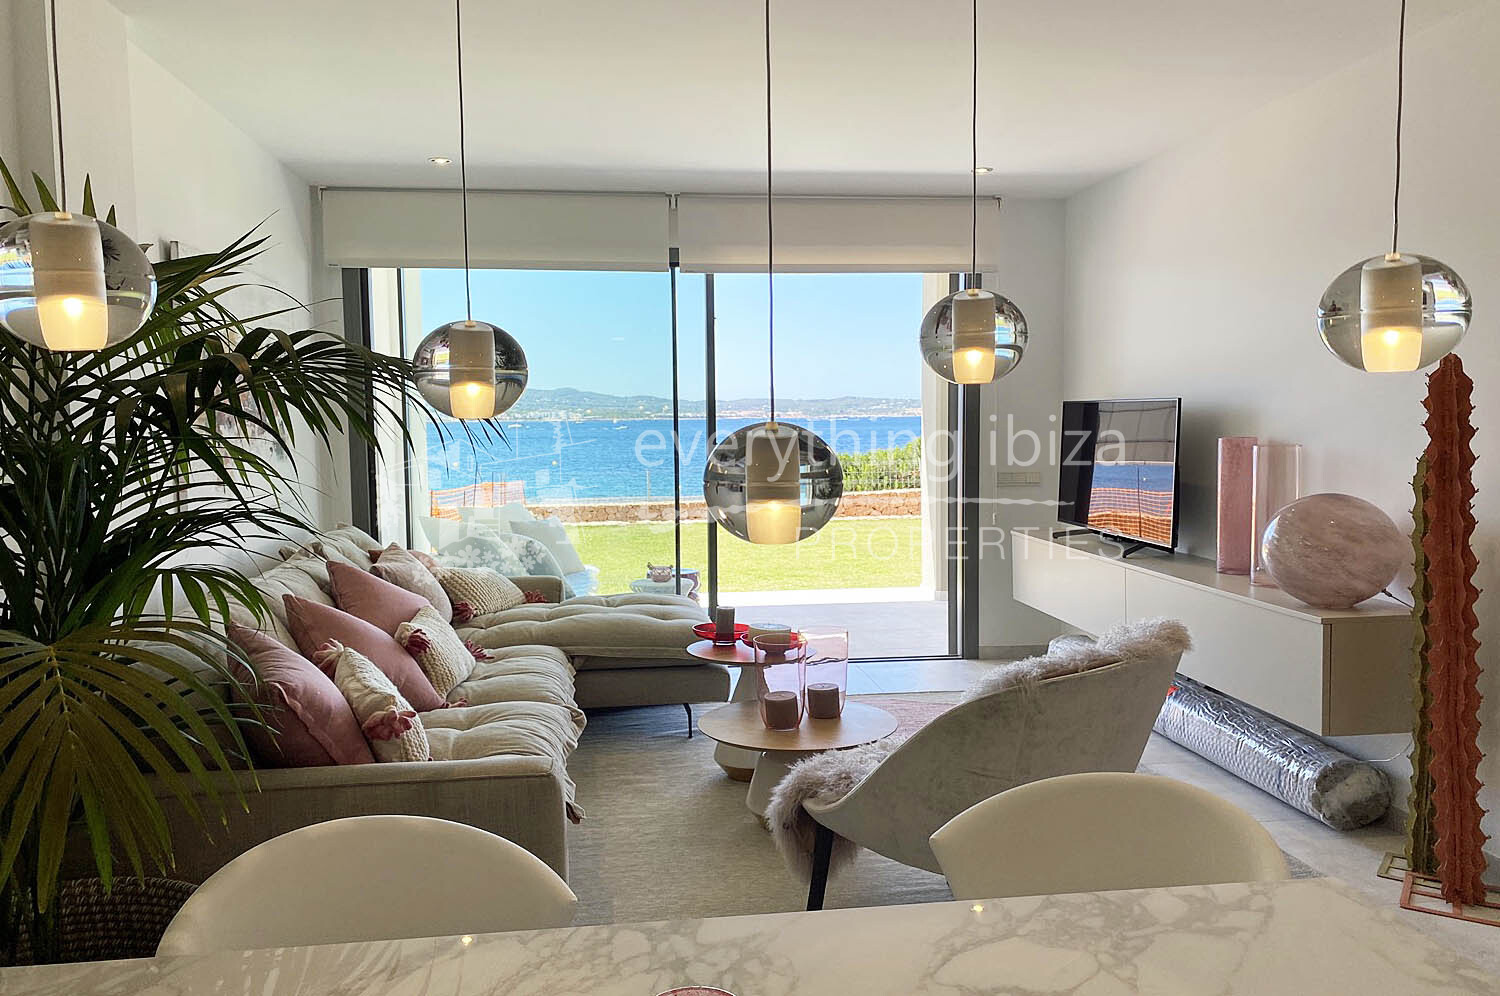 Quality Frontline 2 Bed Apartment in Cala Gracio, ref. 1428, for sale in Ibiza by everything ibiza Properties